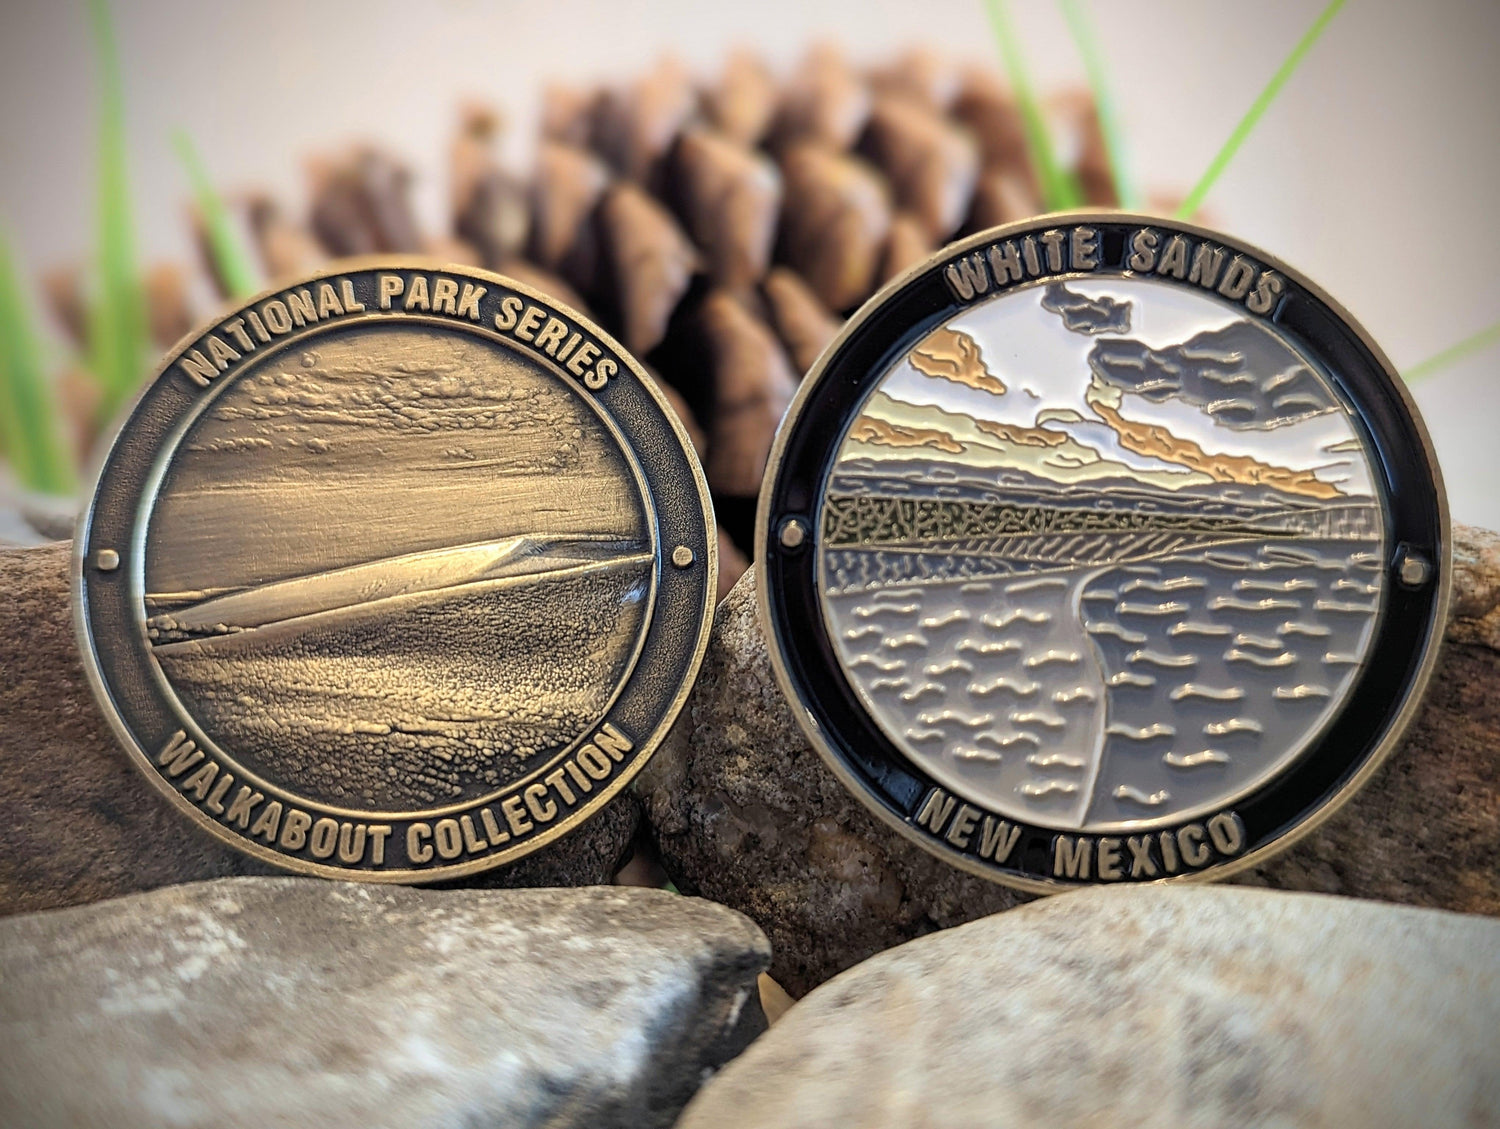 WHITE SANDS NATIONAL PARK CHALLENGE COIN